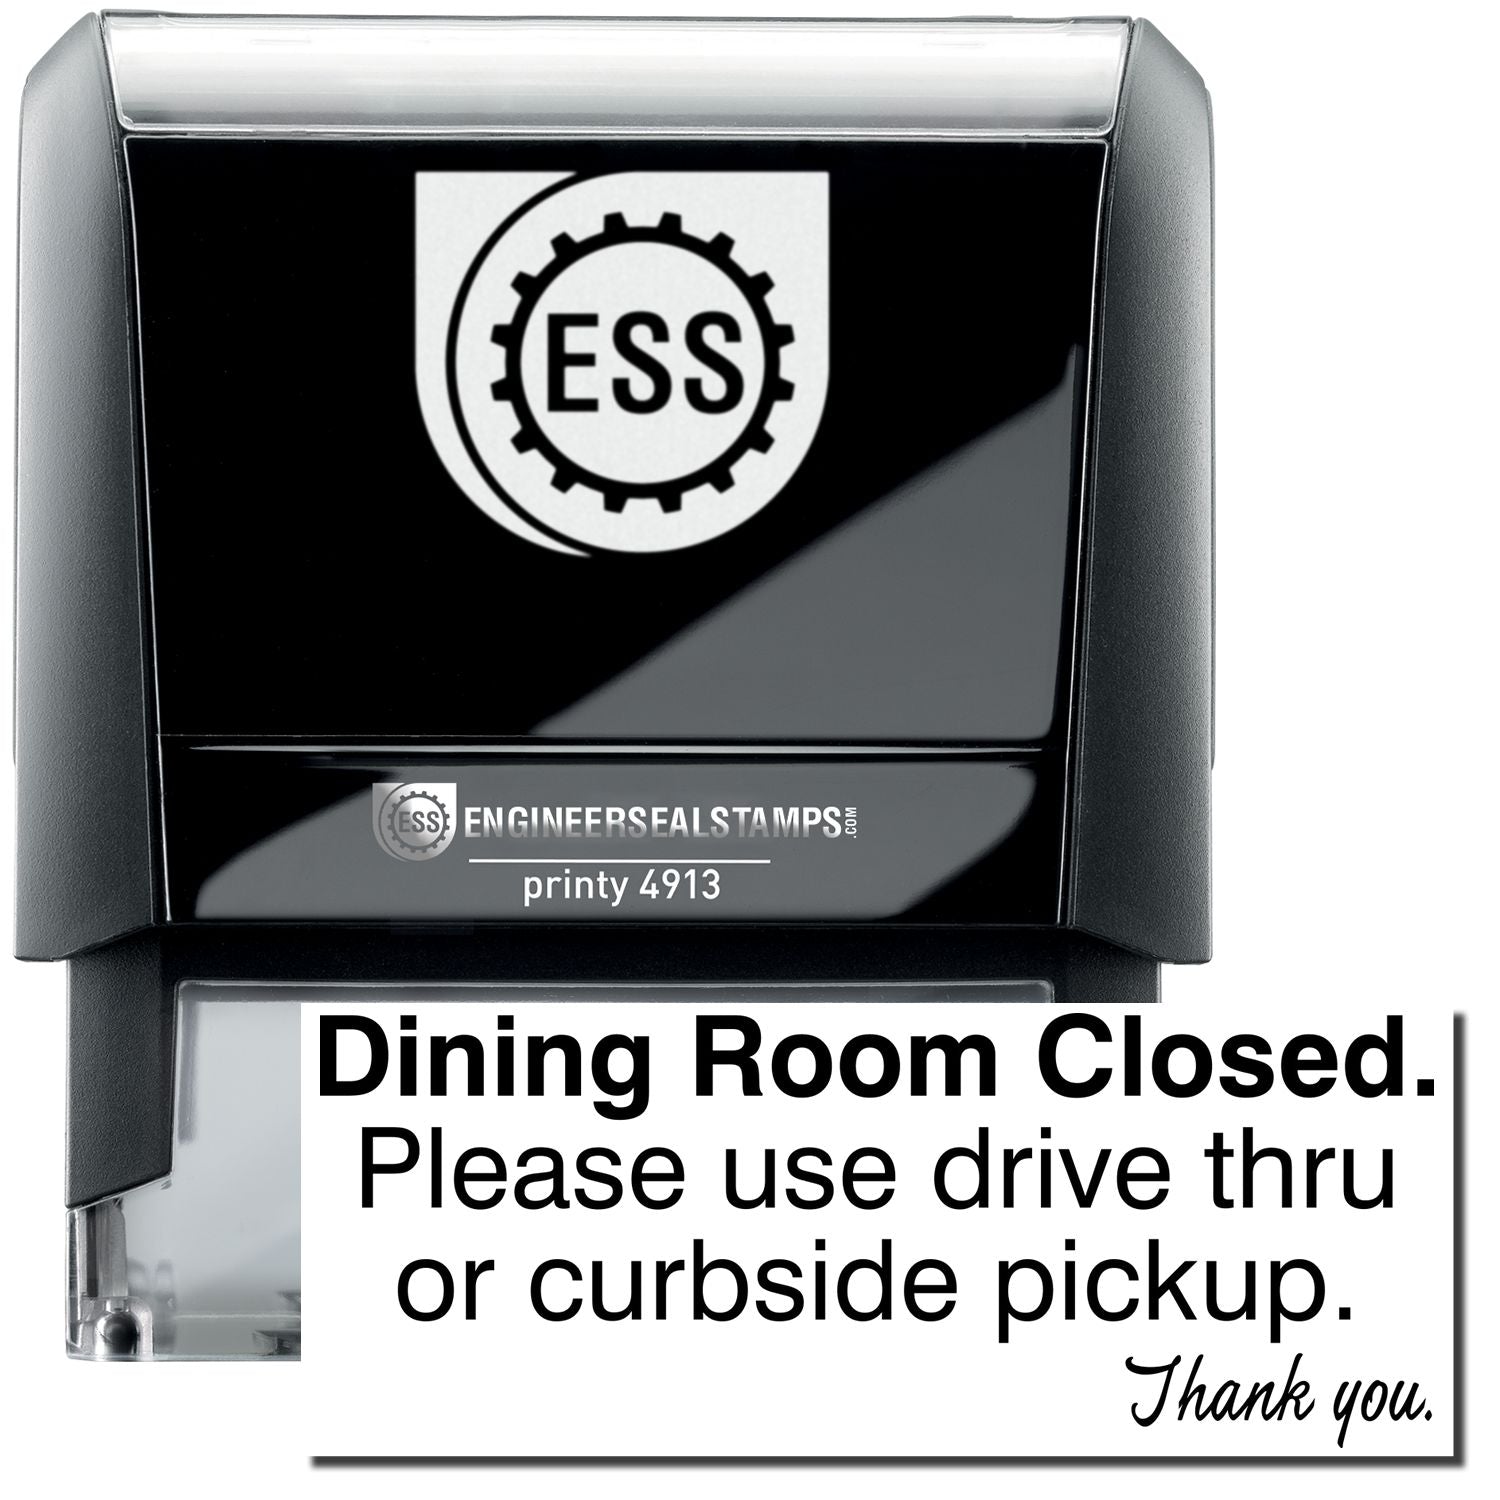 A self-inking stamp with a stamped image showing how the text "Dining Room Closed. Please use drive thru or curbside pickup. Thank you." in a large font is displayed by it after stamping.